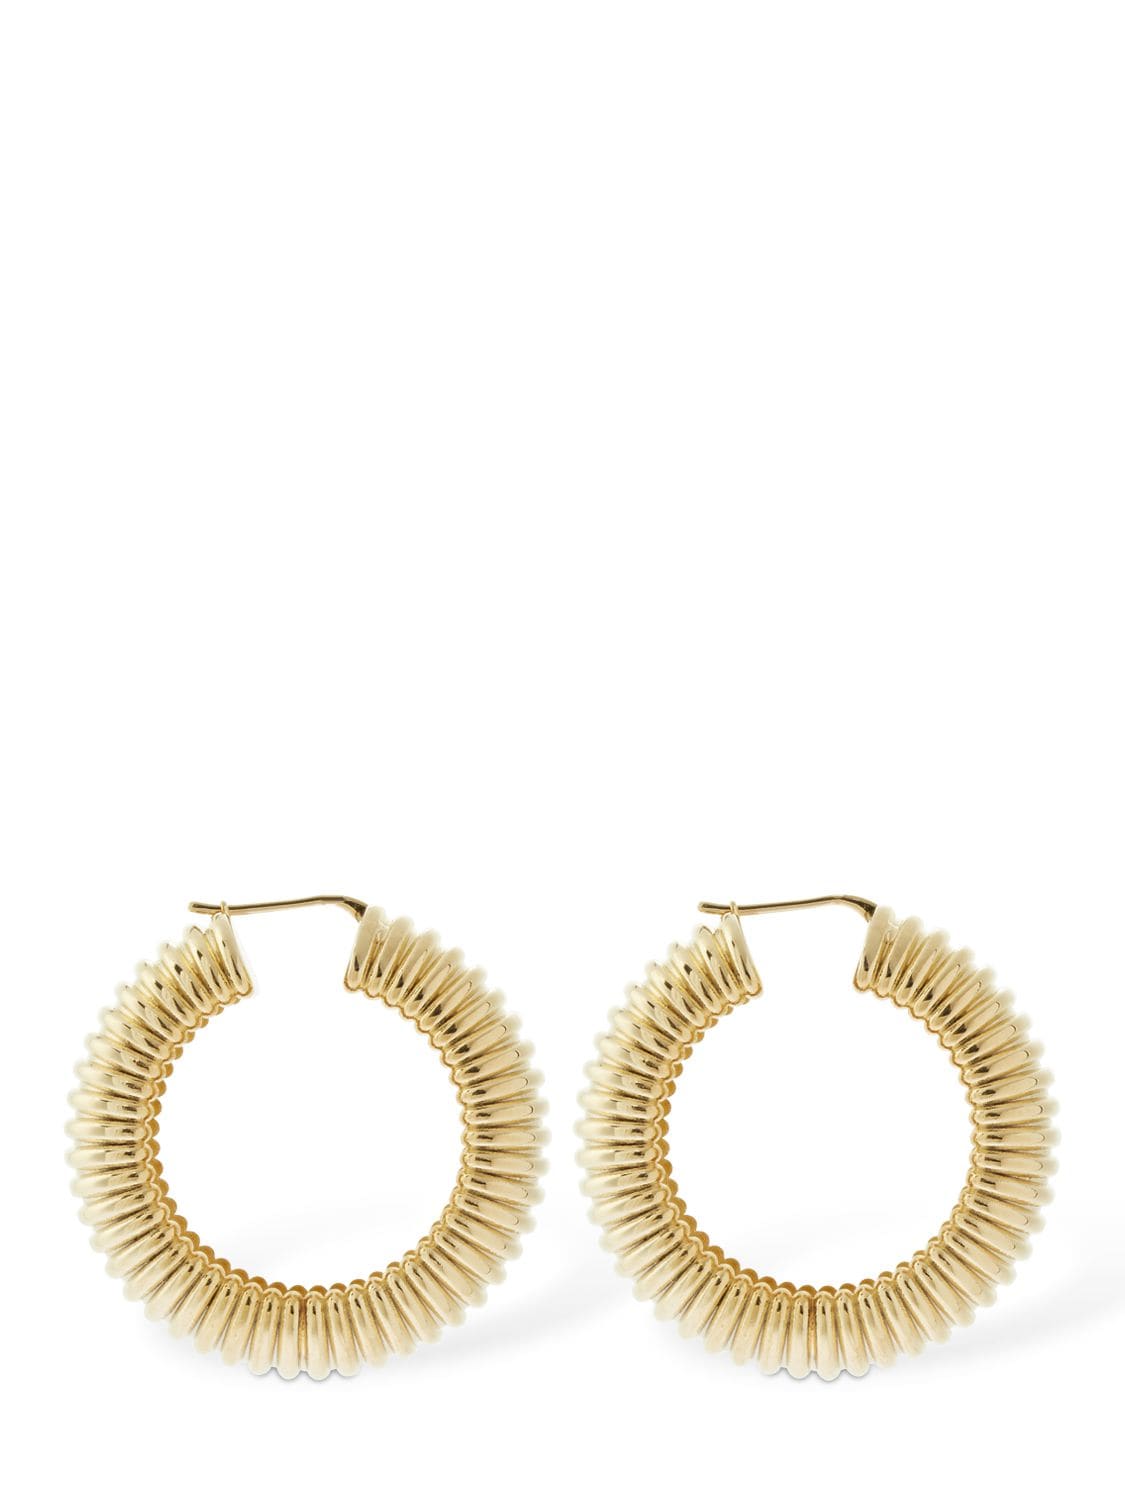 Ami Small Thick Hoop Earrings